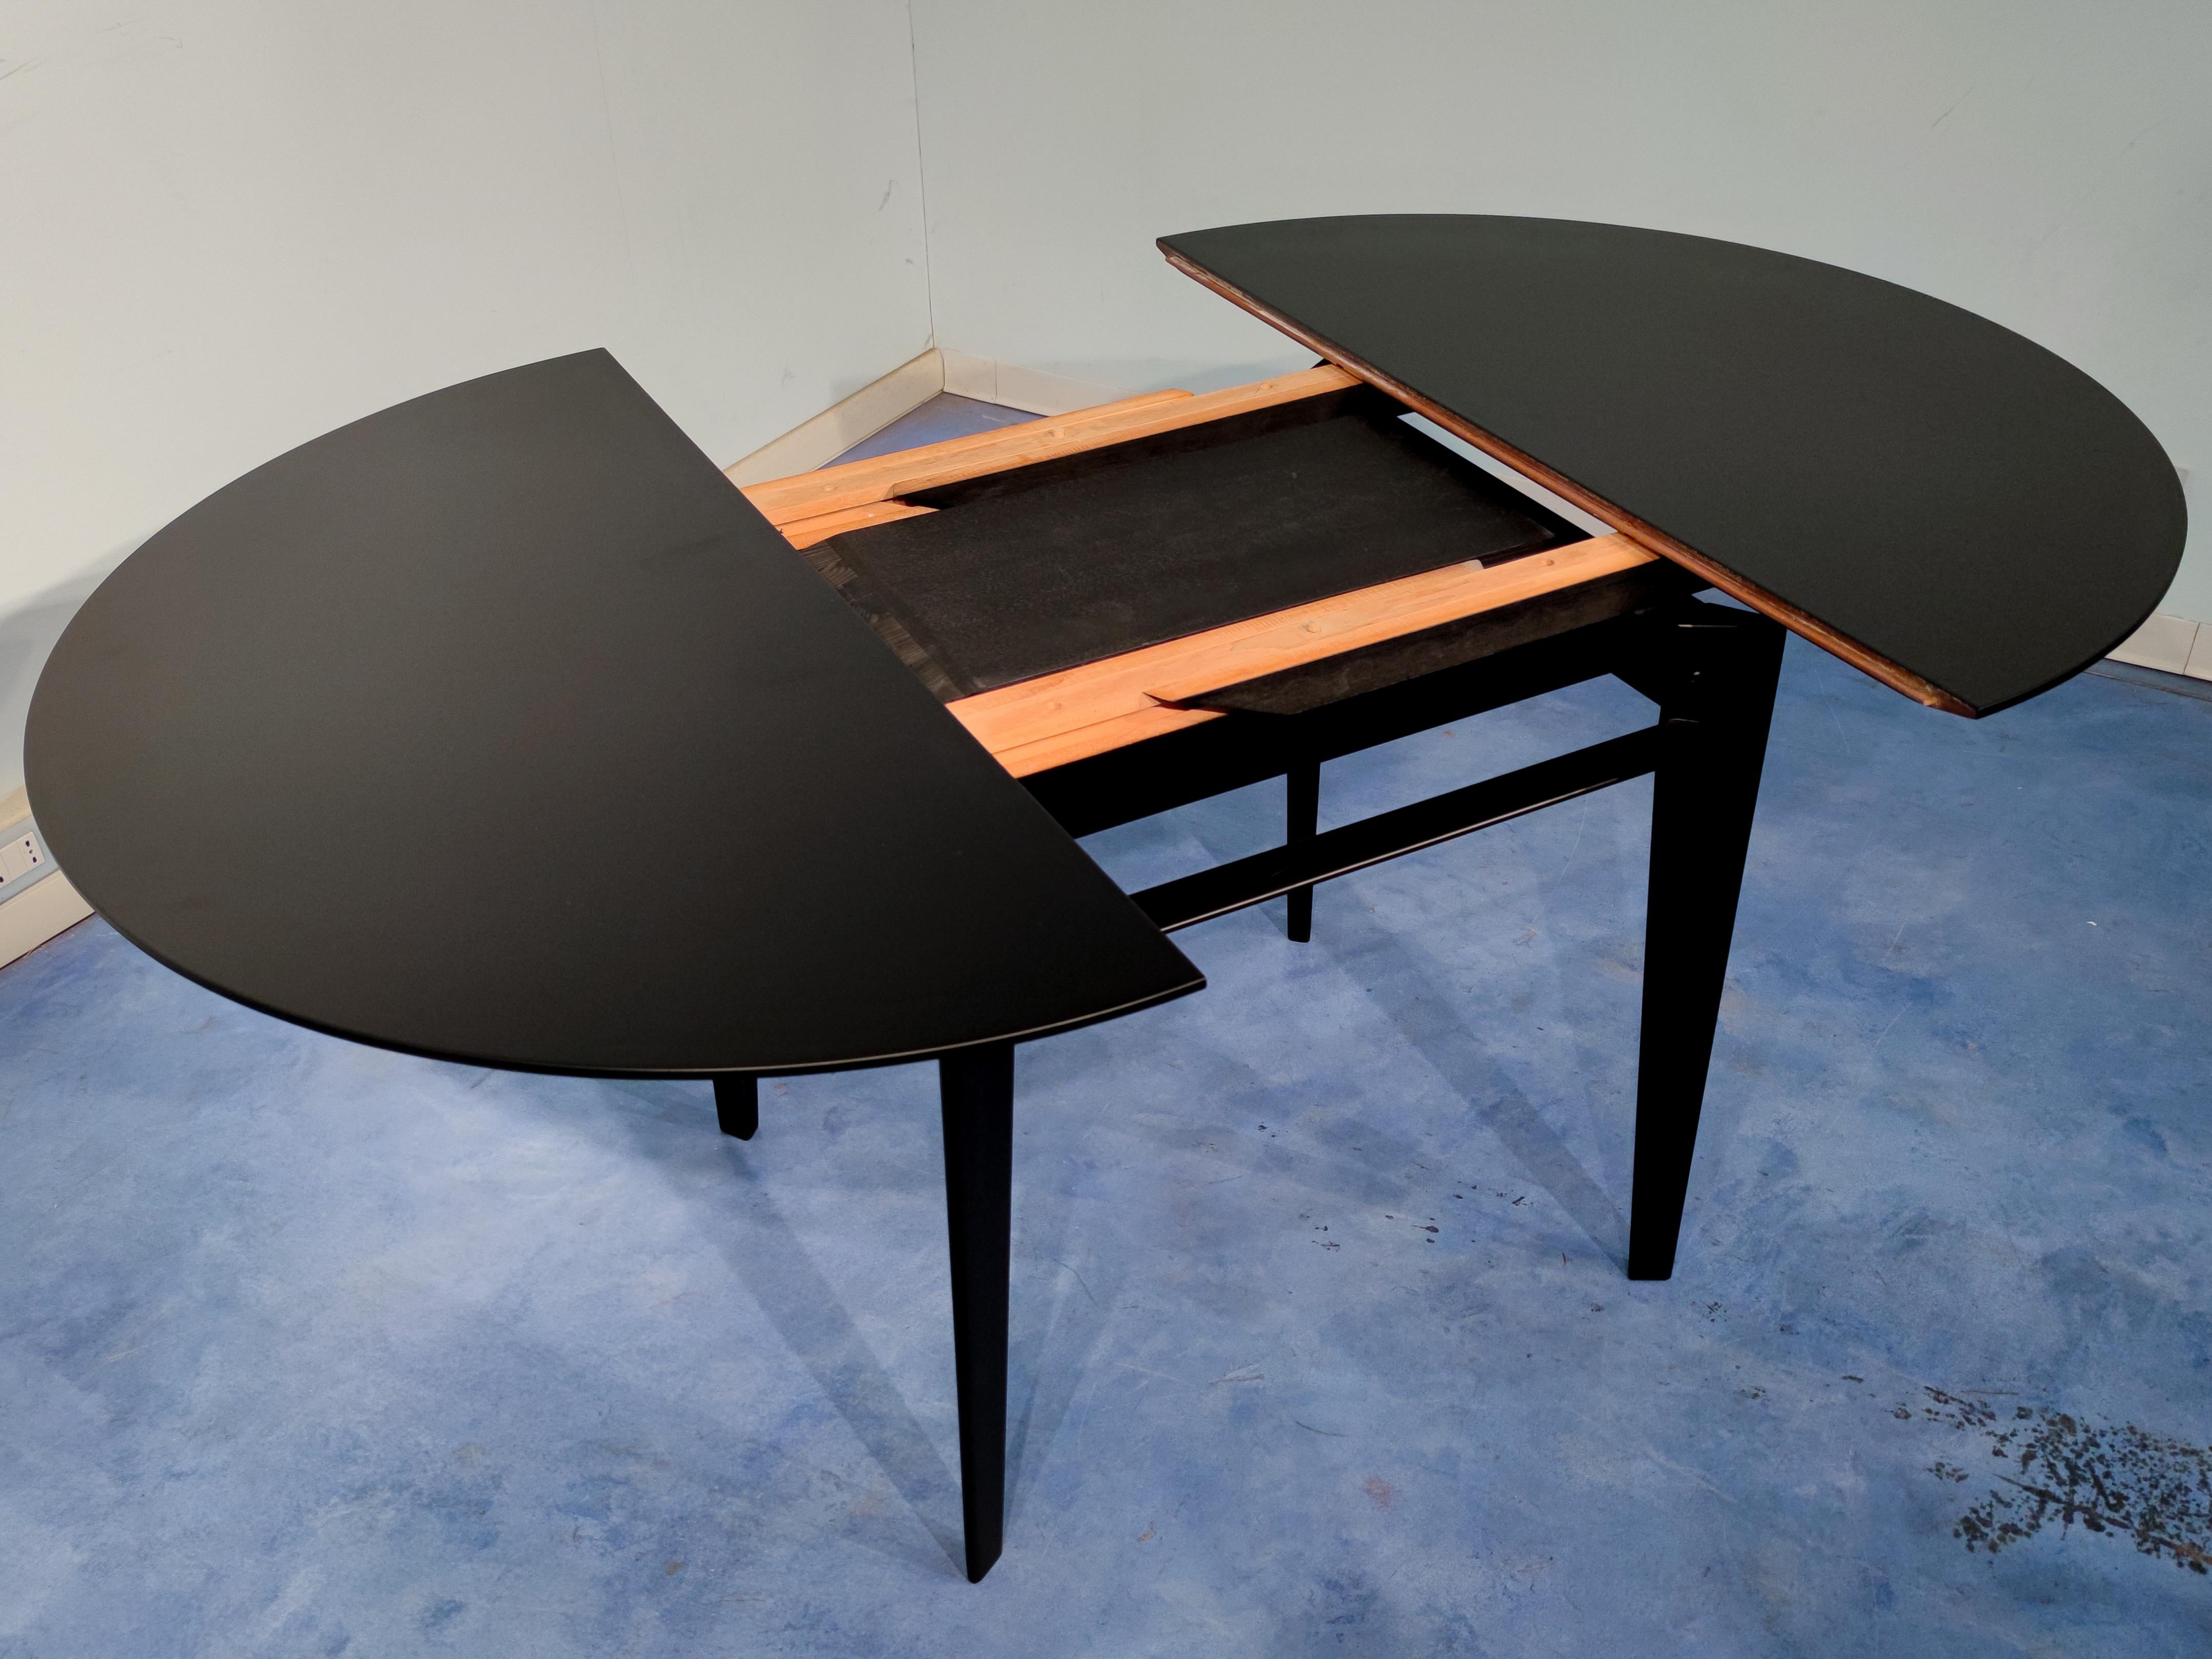 Italian Midcentury Extendable Dining Table by Vittorio Dassi, 1950s For Sale 5